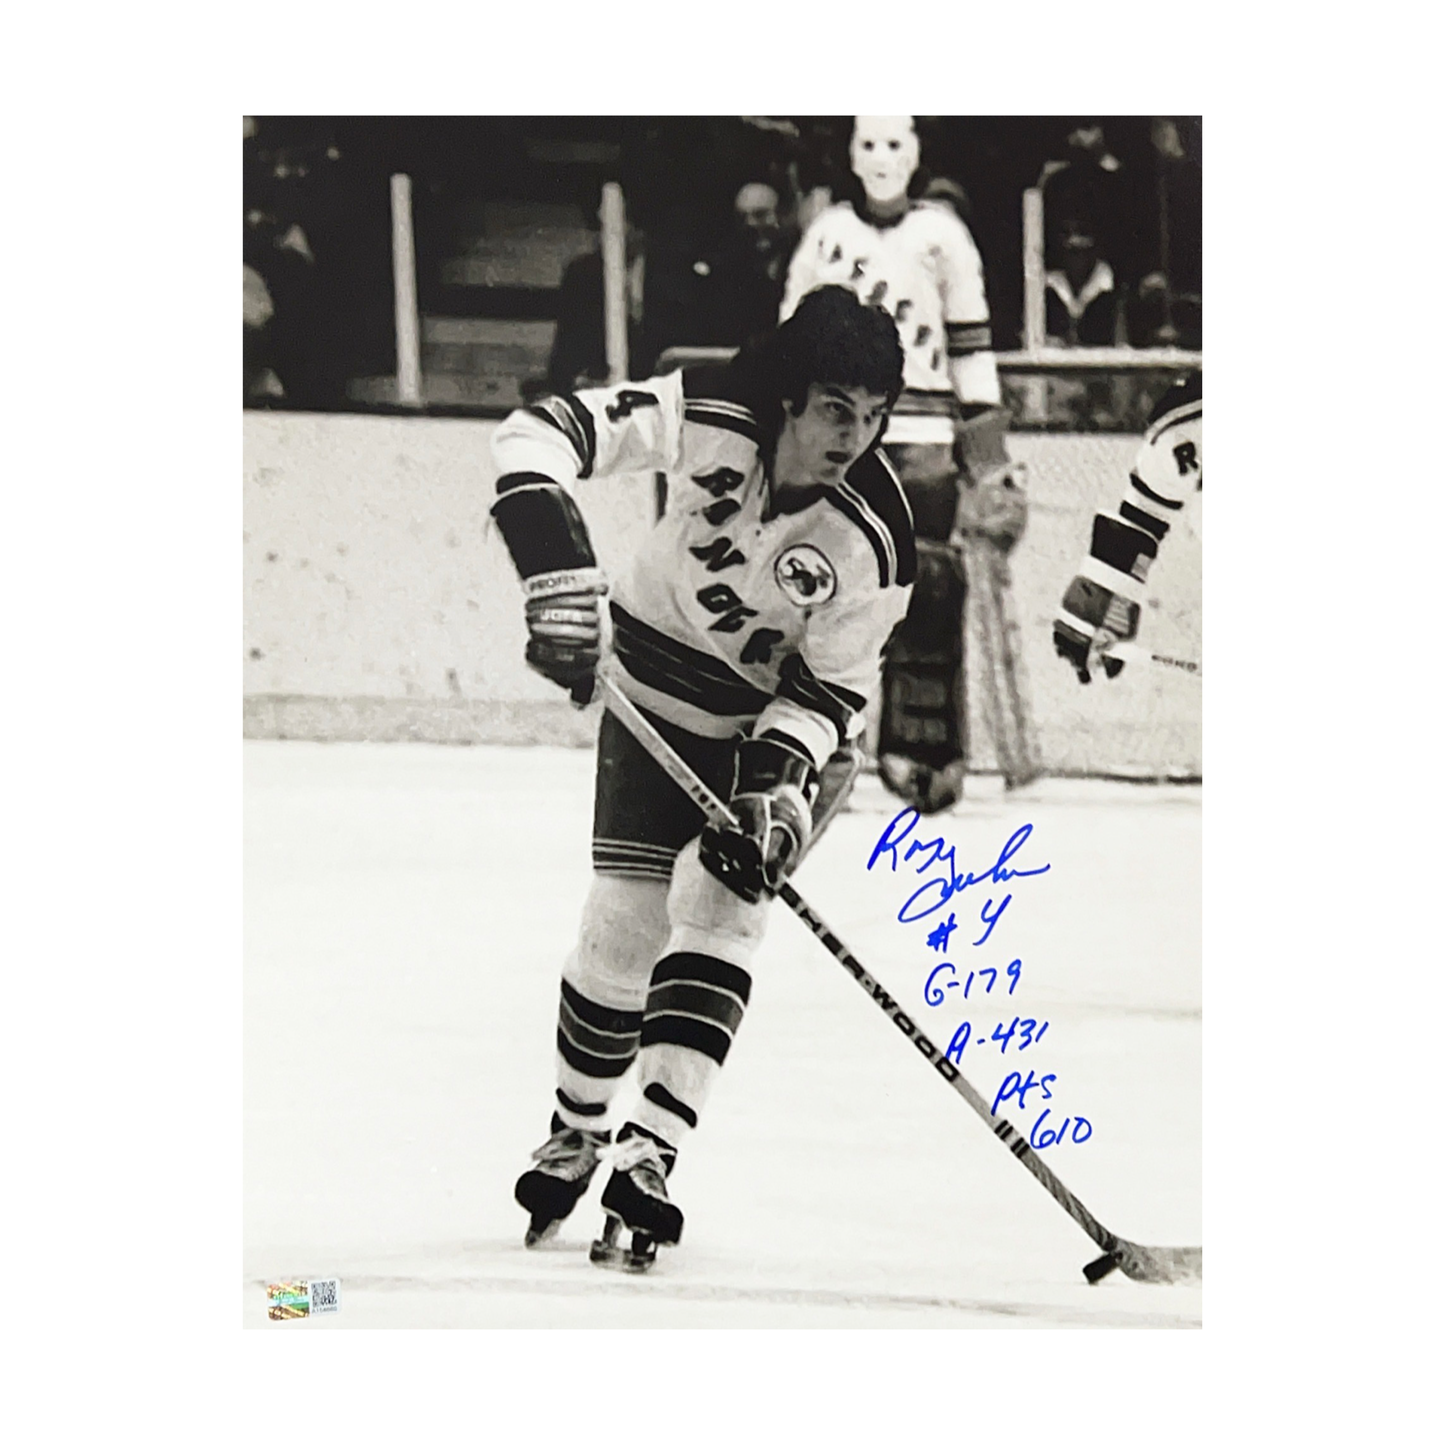 Ron Greschner Autographed New York Rangers B&W Skating 11x14 “G-179, A-431, Pts-610” Inscriptions Steiner CX